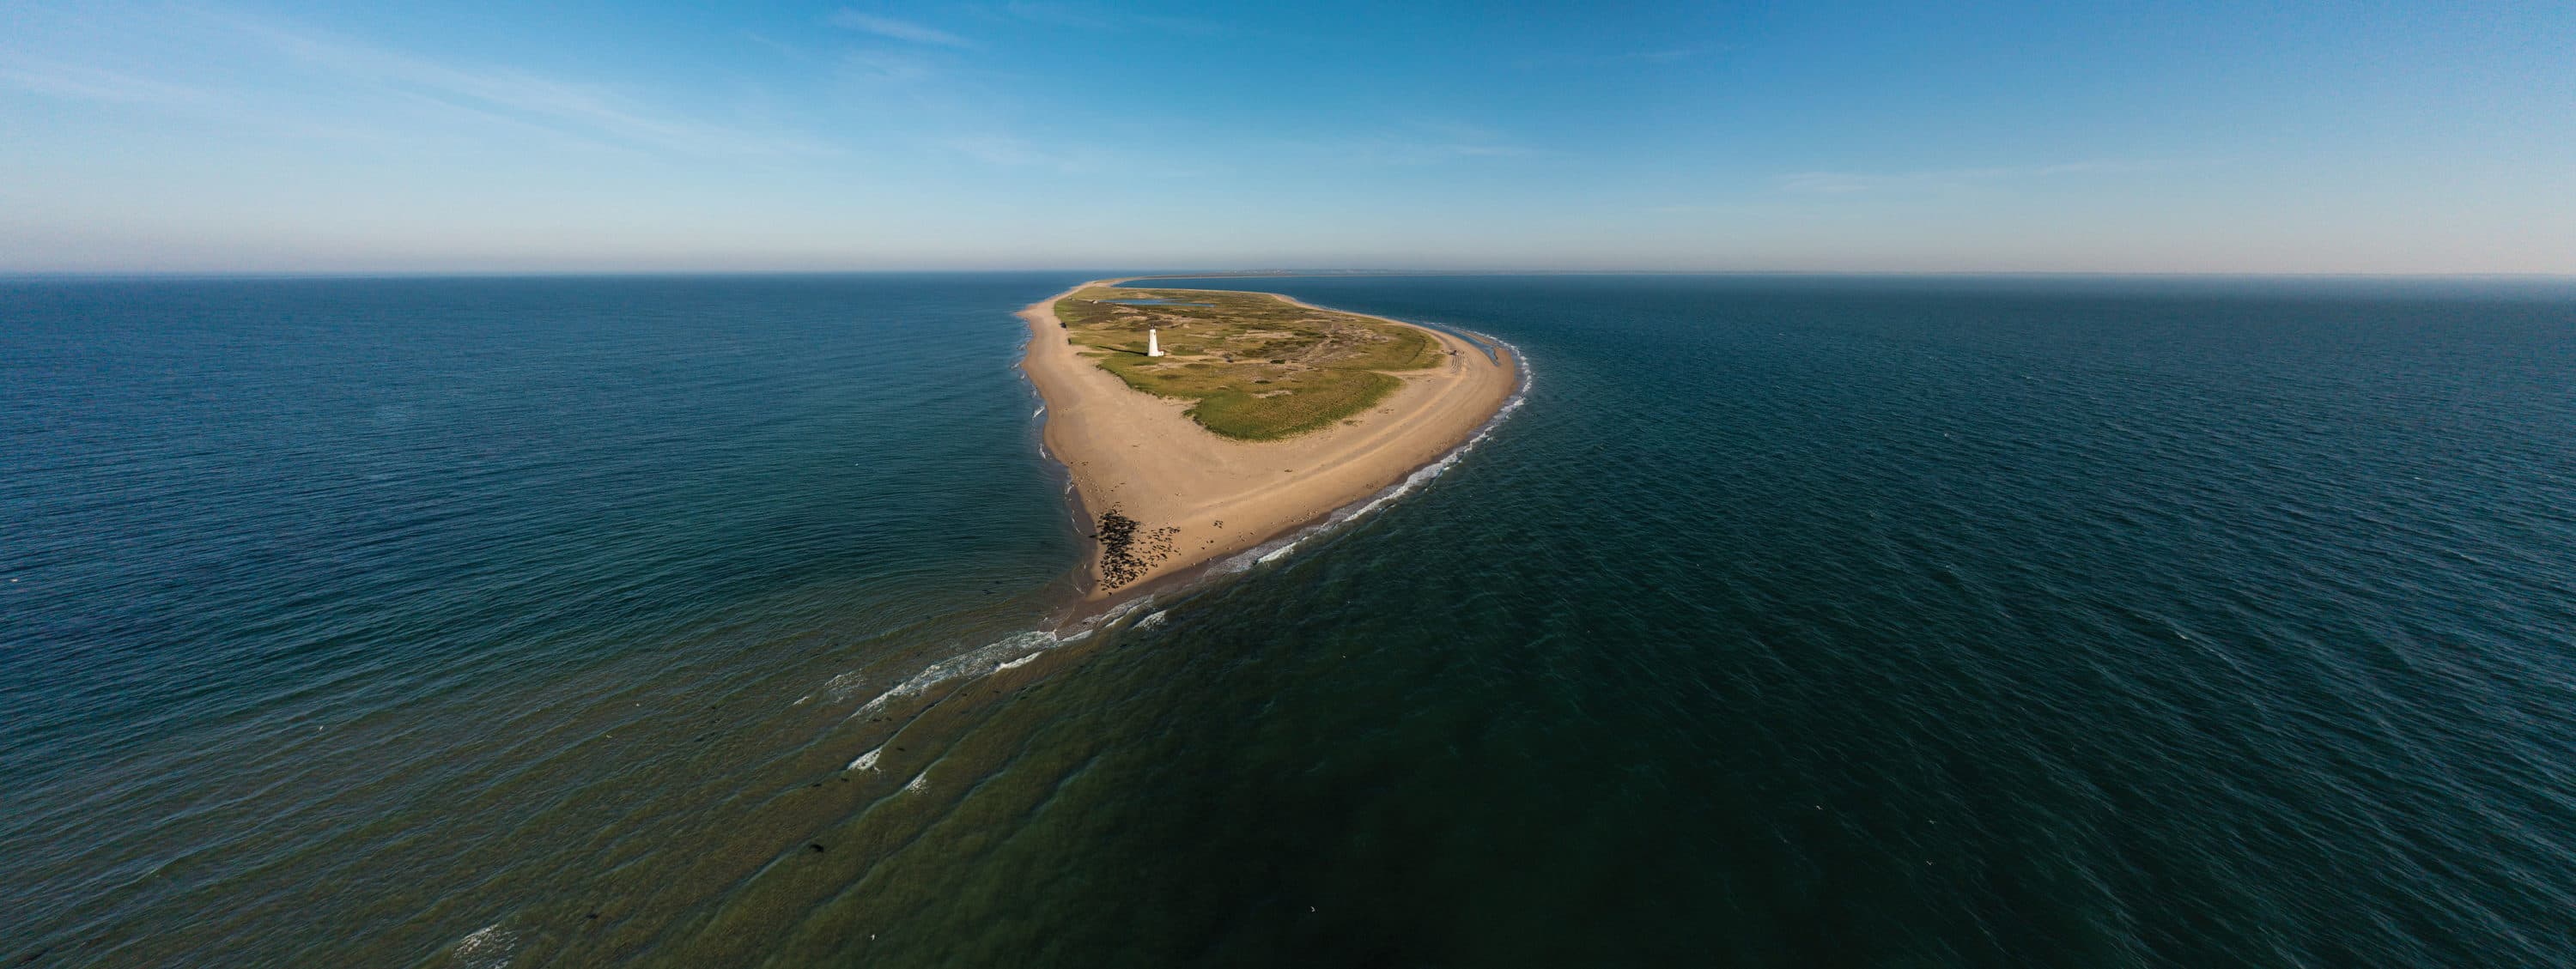 The end of Coskata-Coatue Wildlife Refuge, offshore from the Great Point Lighthouse. Courtesy Above Summit/The Trustees of Reservations